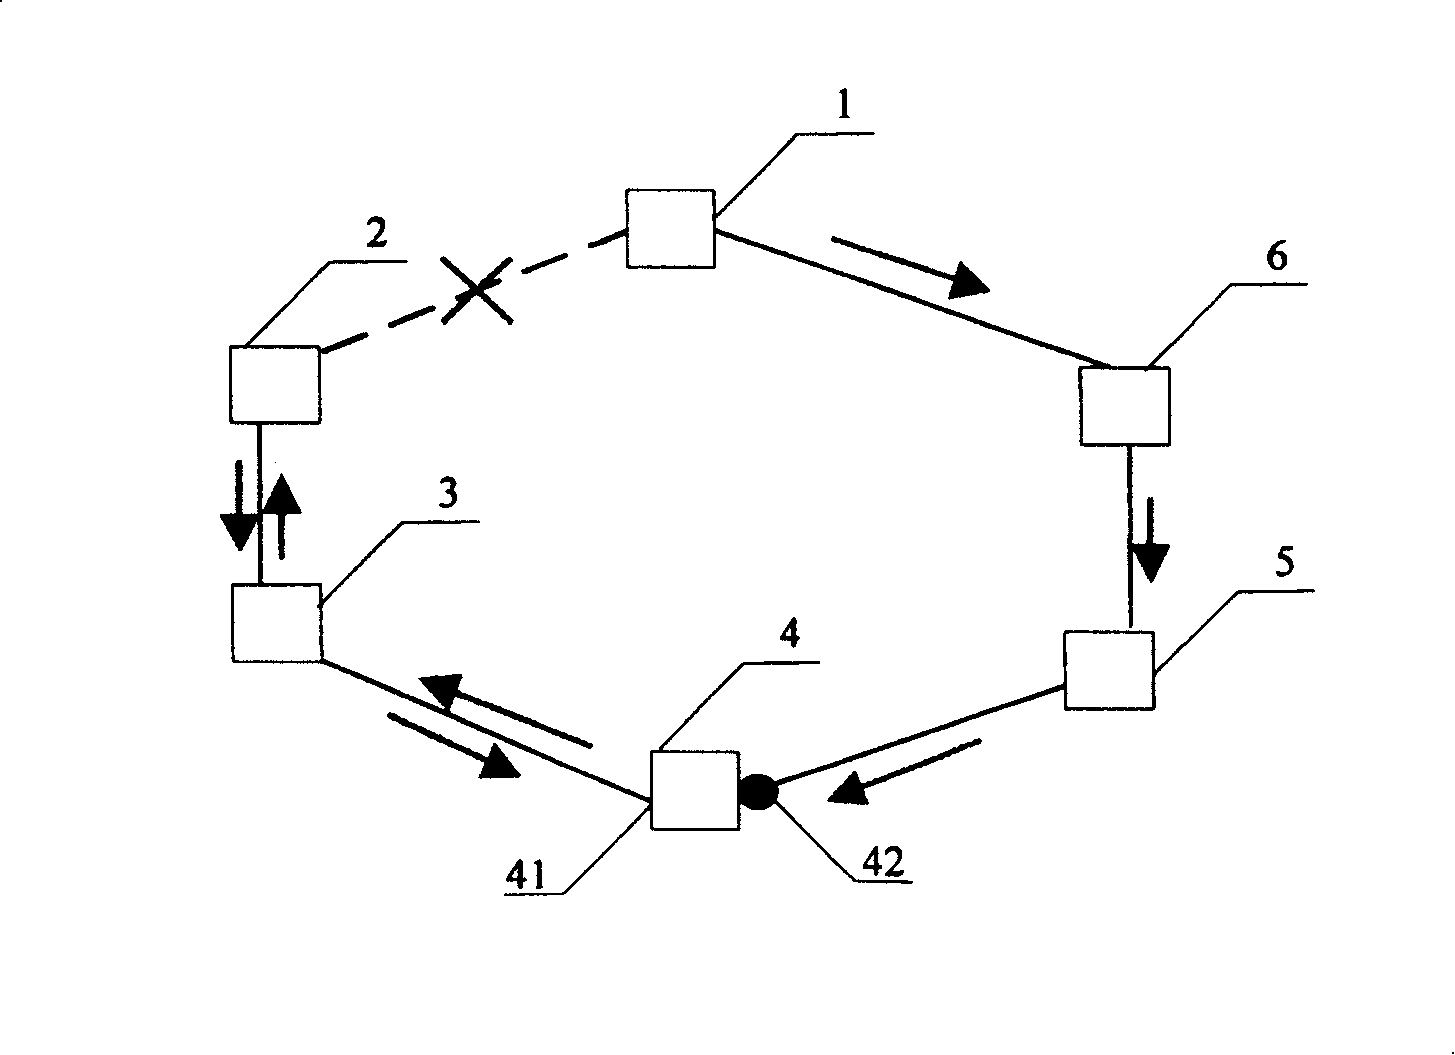 Fast ring network protecting method and system